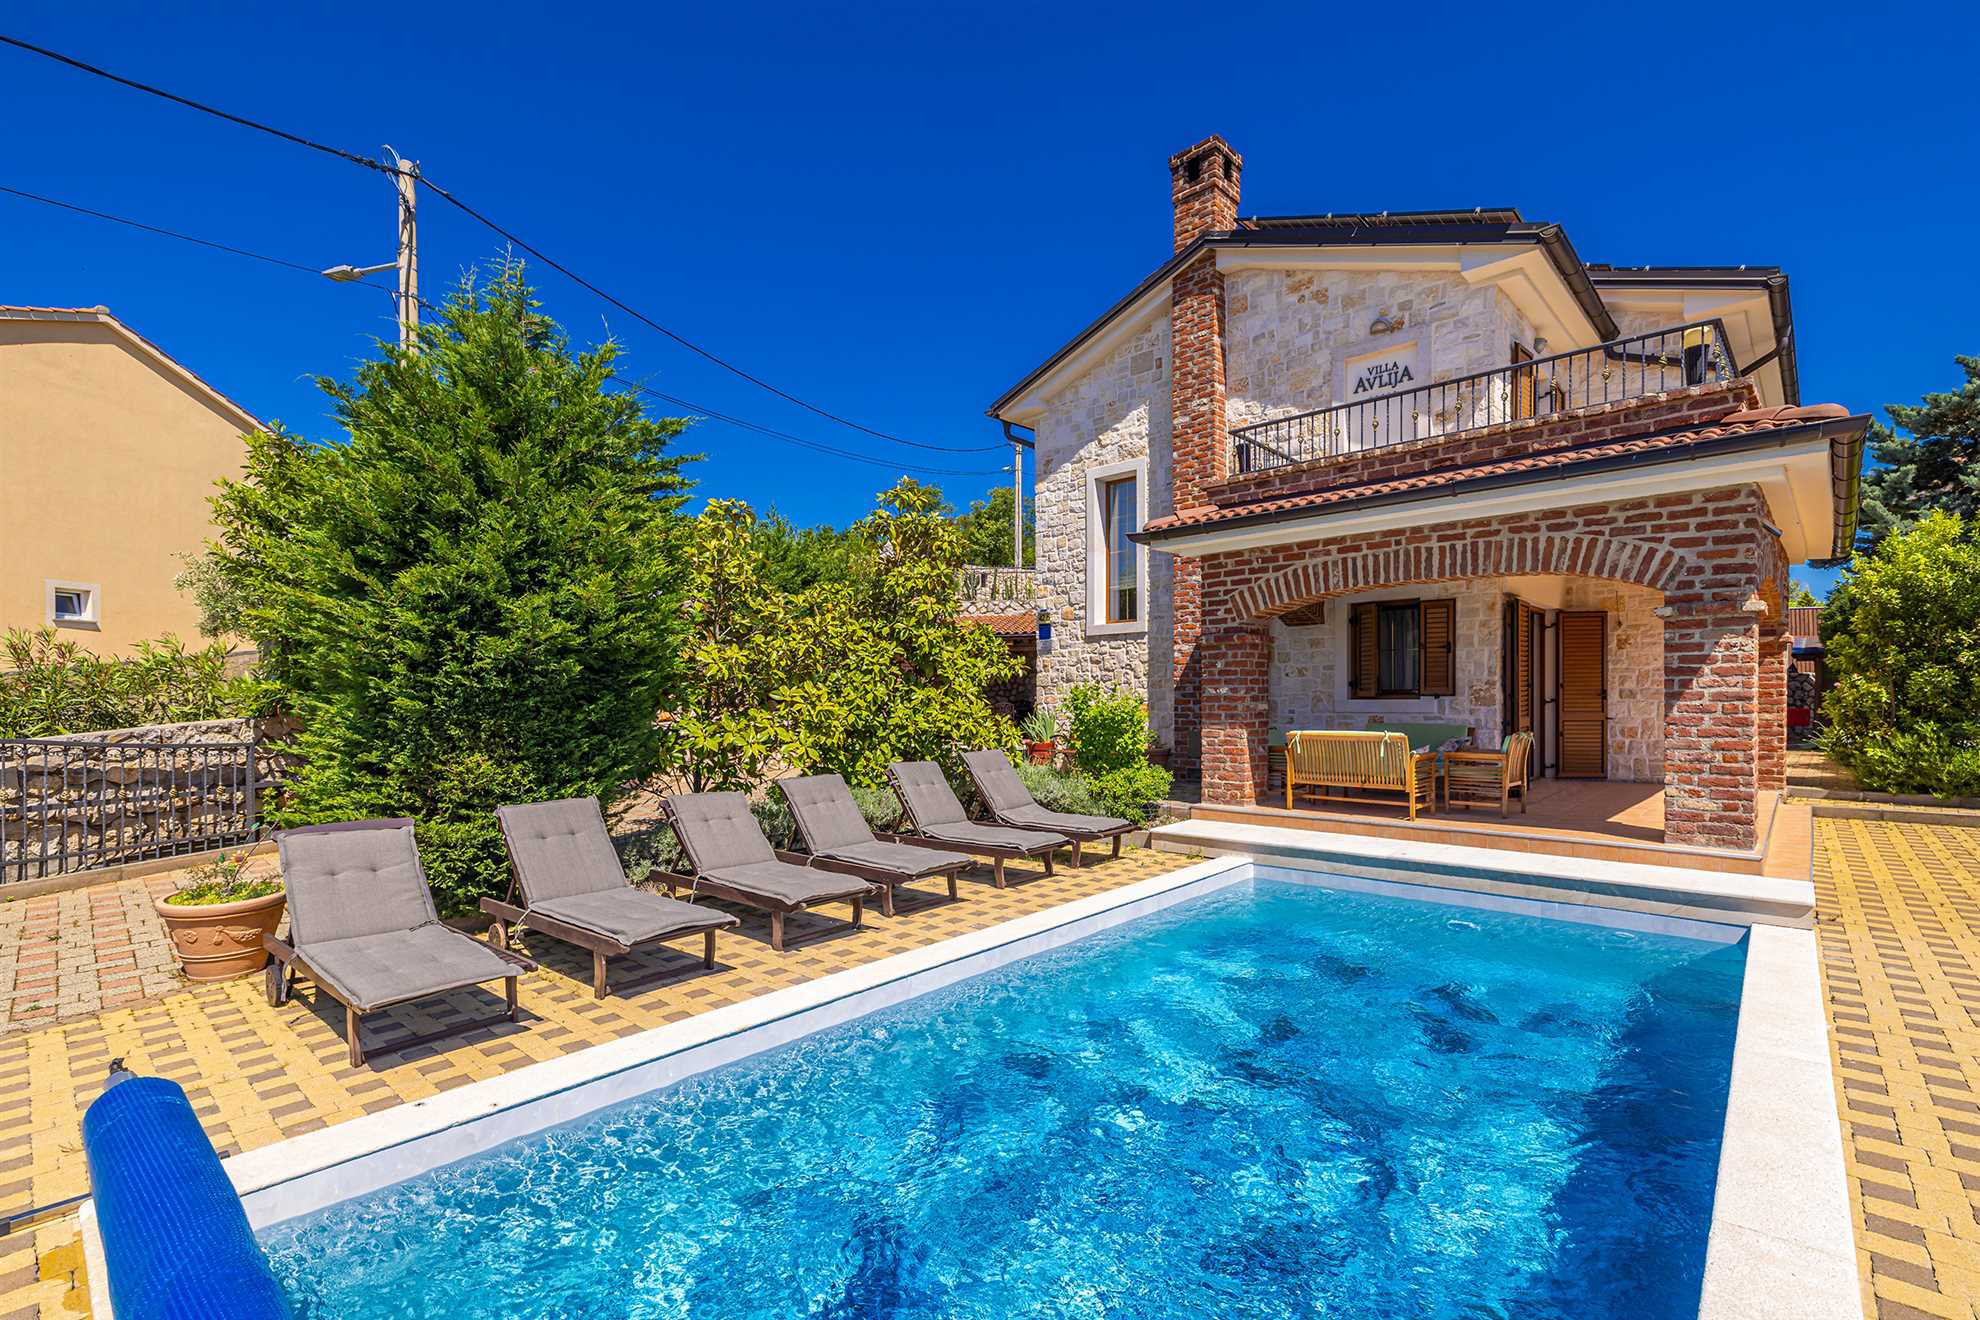 Luxury villa Rustica with private pool, jacuzzi and outdoor sauna